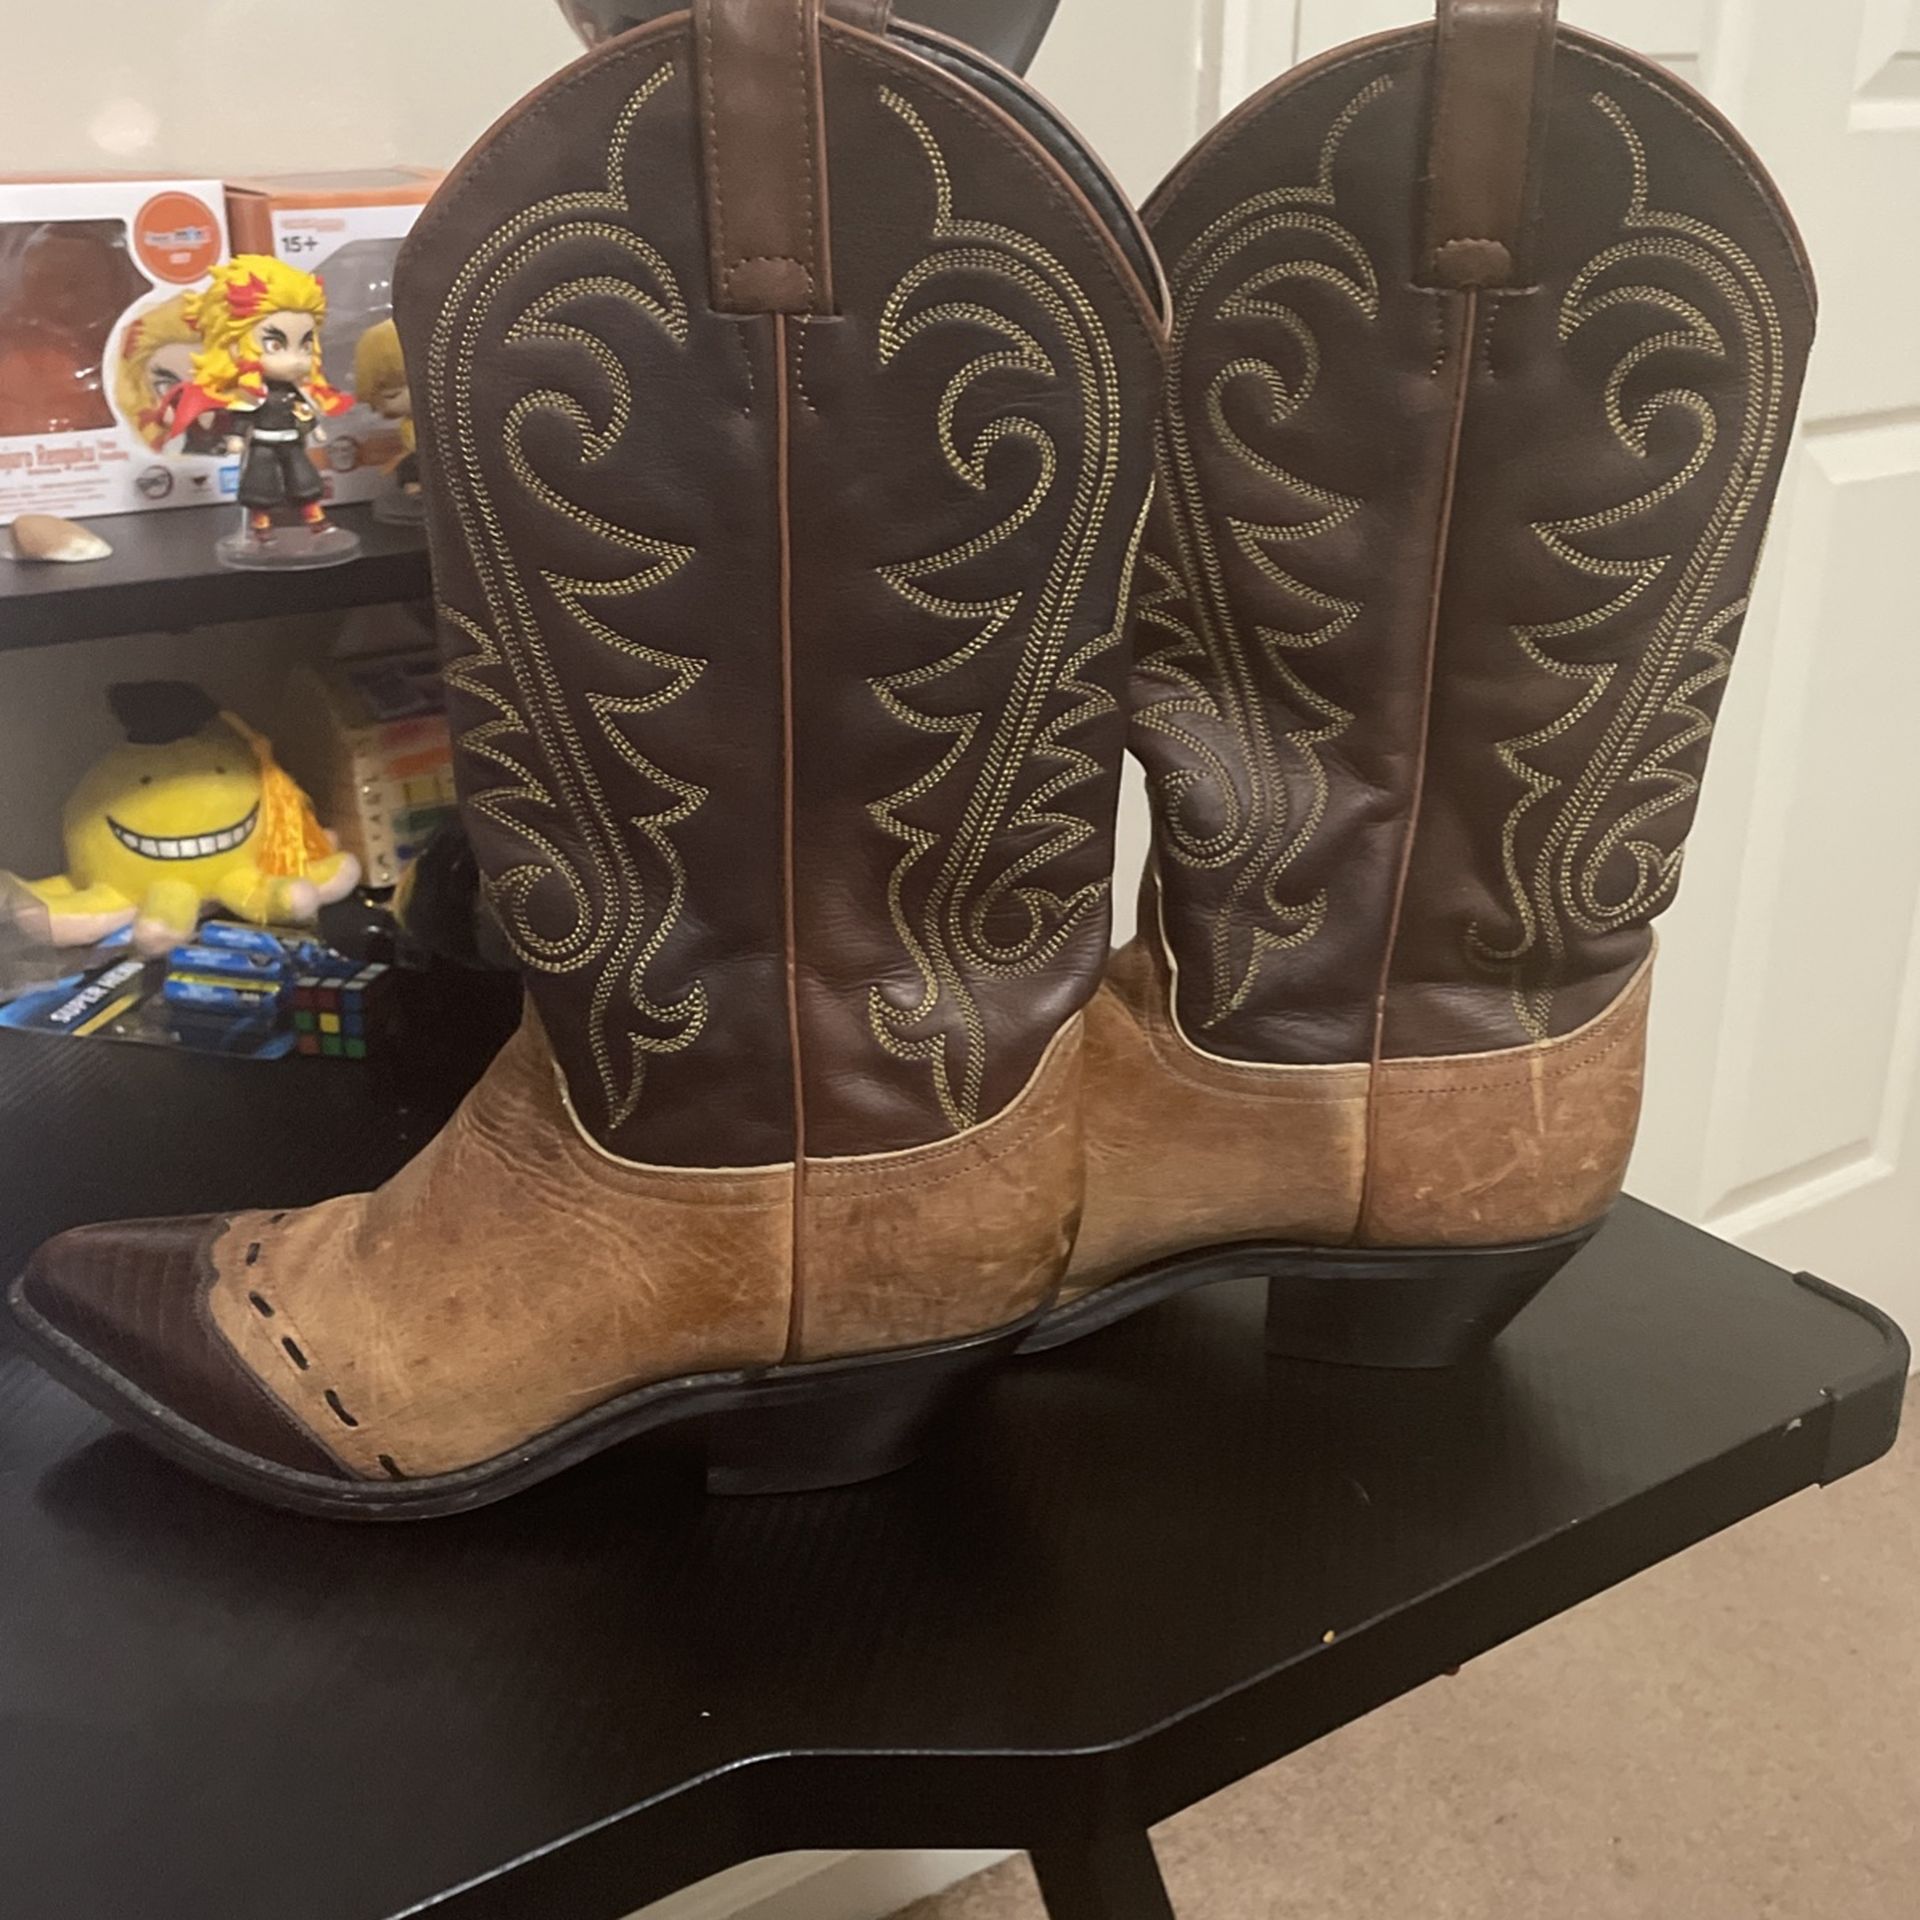 Size 9 Women’s boots